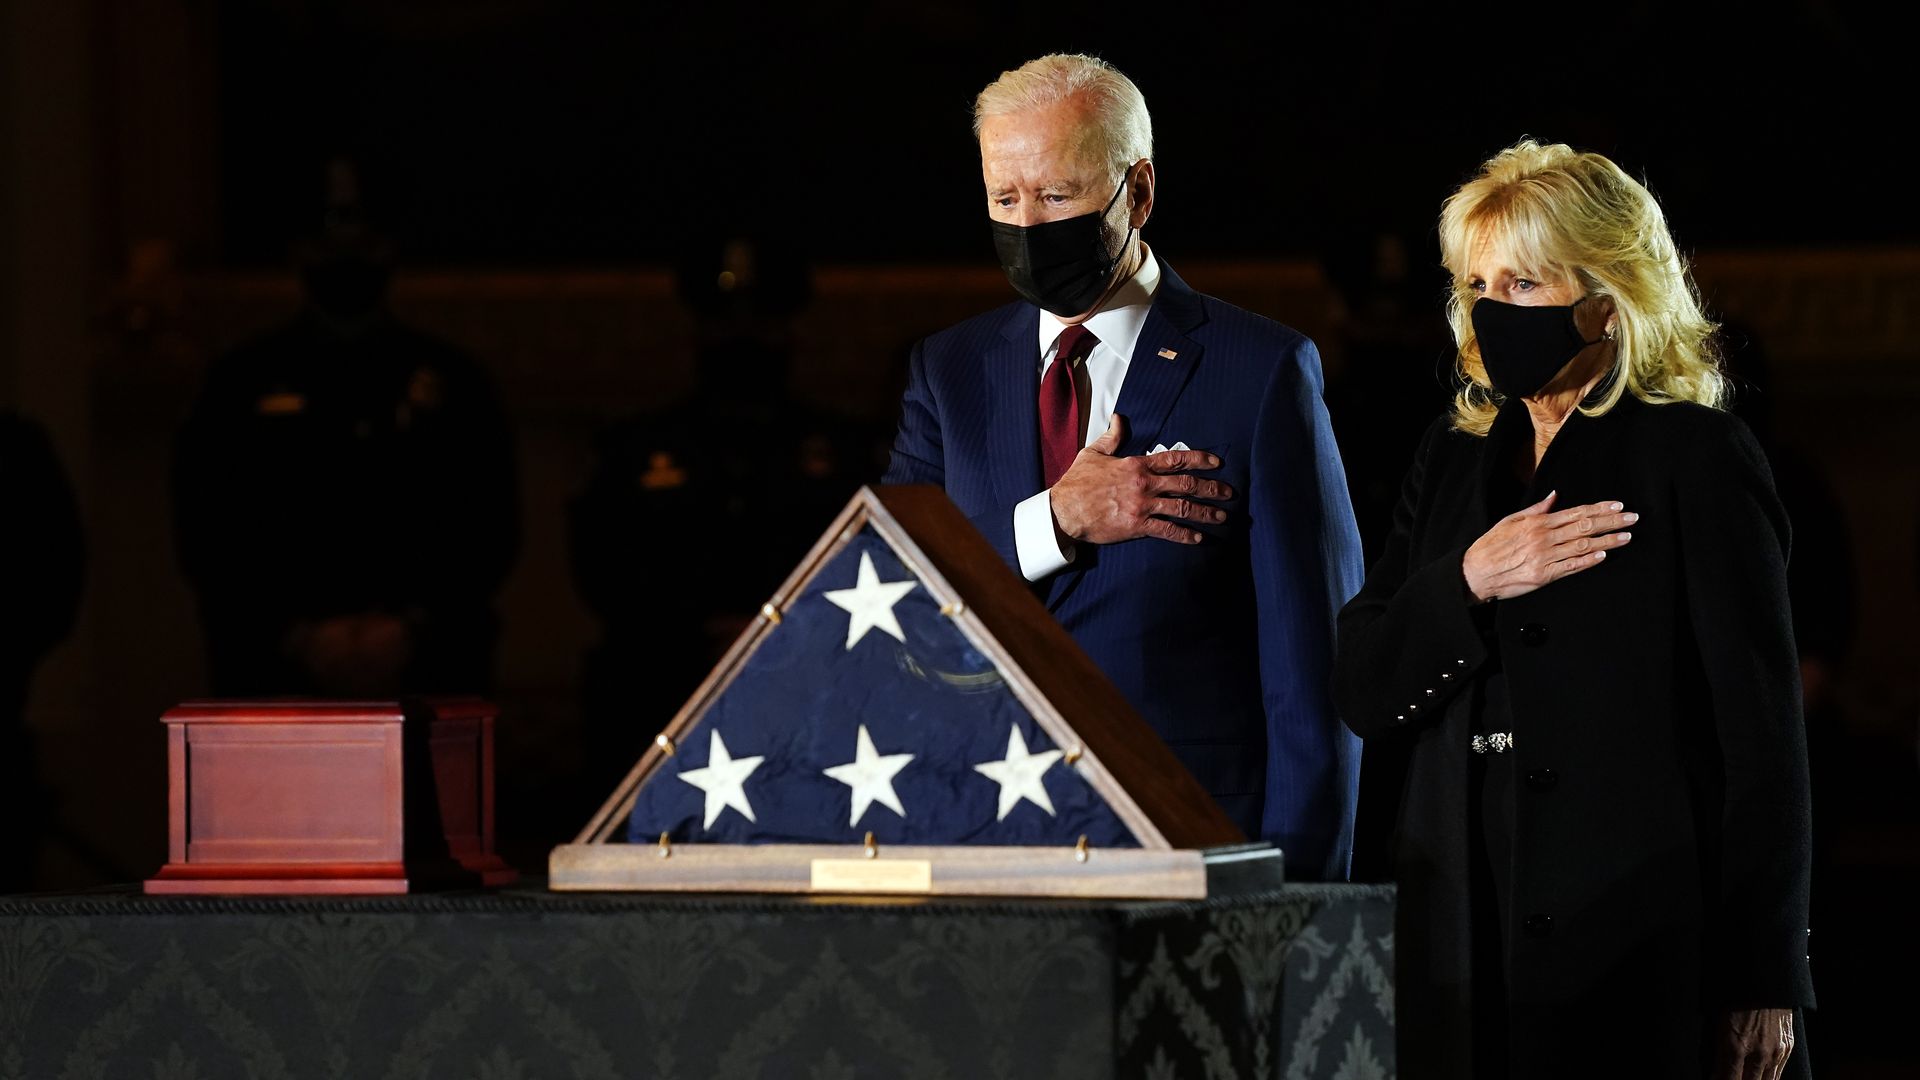 Joe Biden and First Lady Jill Biden pay their respects in front of the remains of U.S. Capitol Police Officer Brian Sicknick in the Rotunda of the U.S. Capitol in Washington, D.C